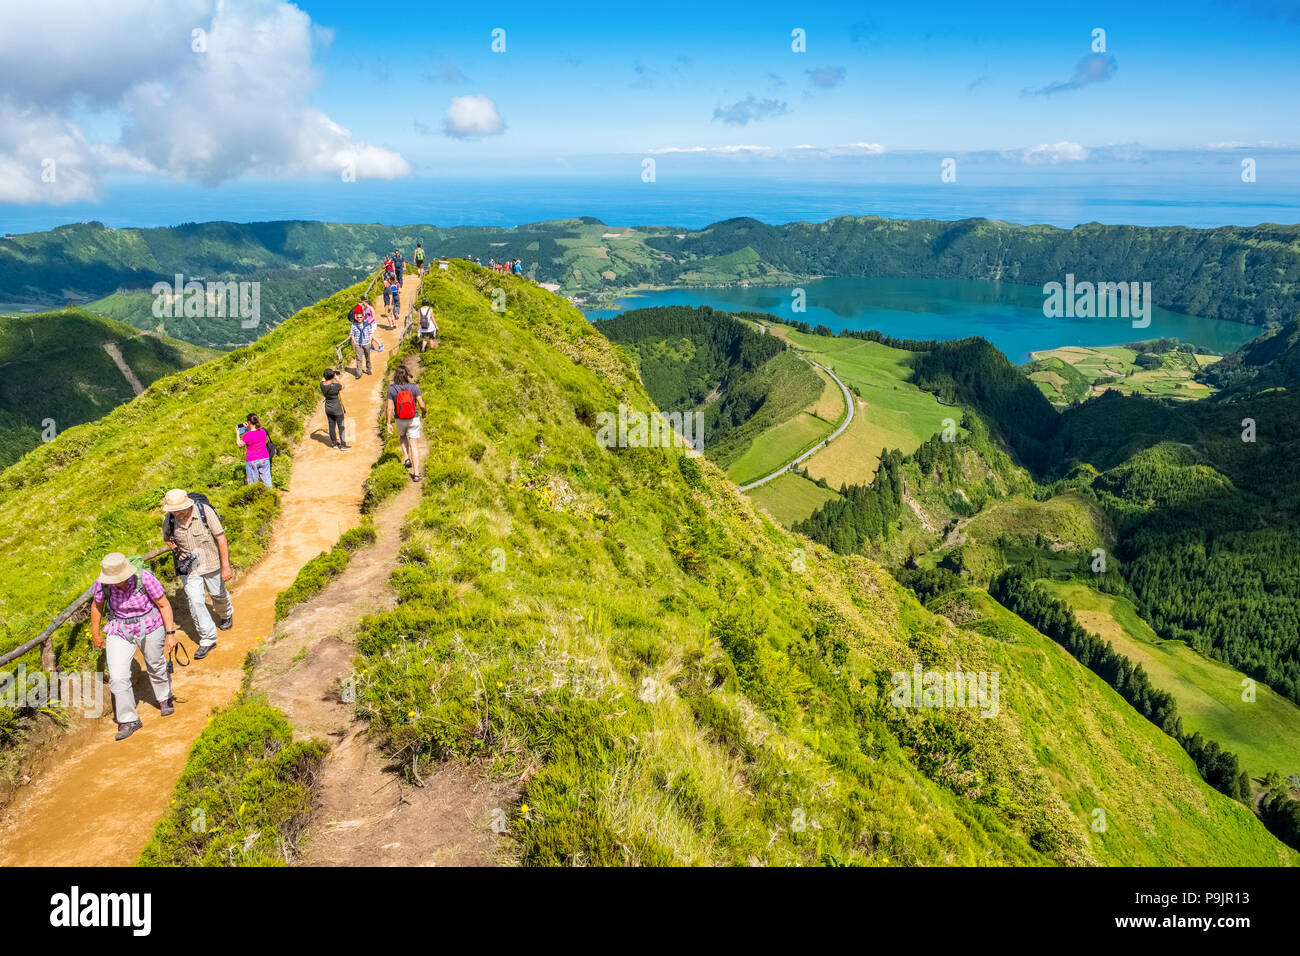 Tourists at a viewpoint over Sete Cidades, two lakes and a village in the dormant crater of a volcano on the island of Sao Miguel, The Azores Stock Photo